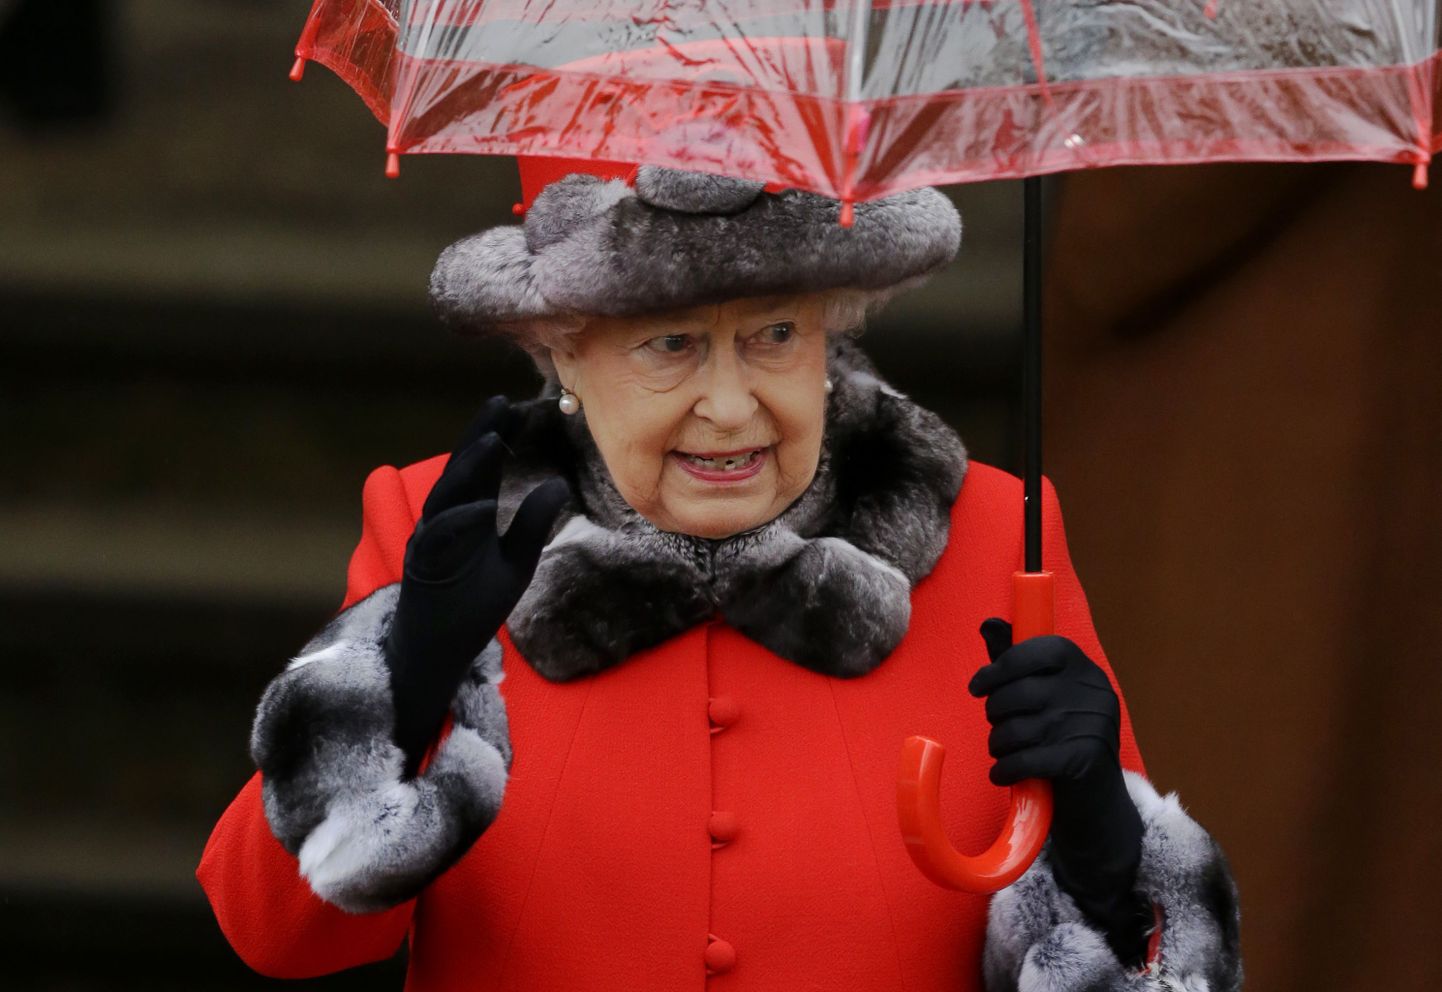 Britain's Queen Elizabeth II waves at the crowd of well-wishers as she leaves after attending the British royal family's traditional Christmas Day church service at St. Mary Magdalene Church in Sandringham, England, Friday, Dec. 25, 2015.  (AP Photo/Matt Dunham)